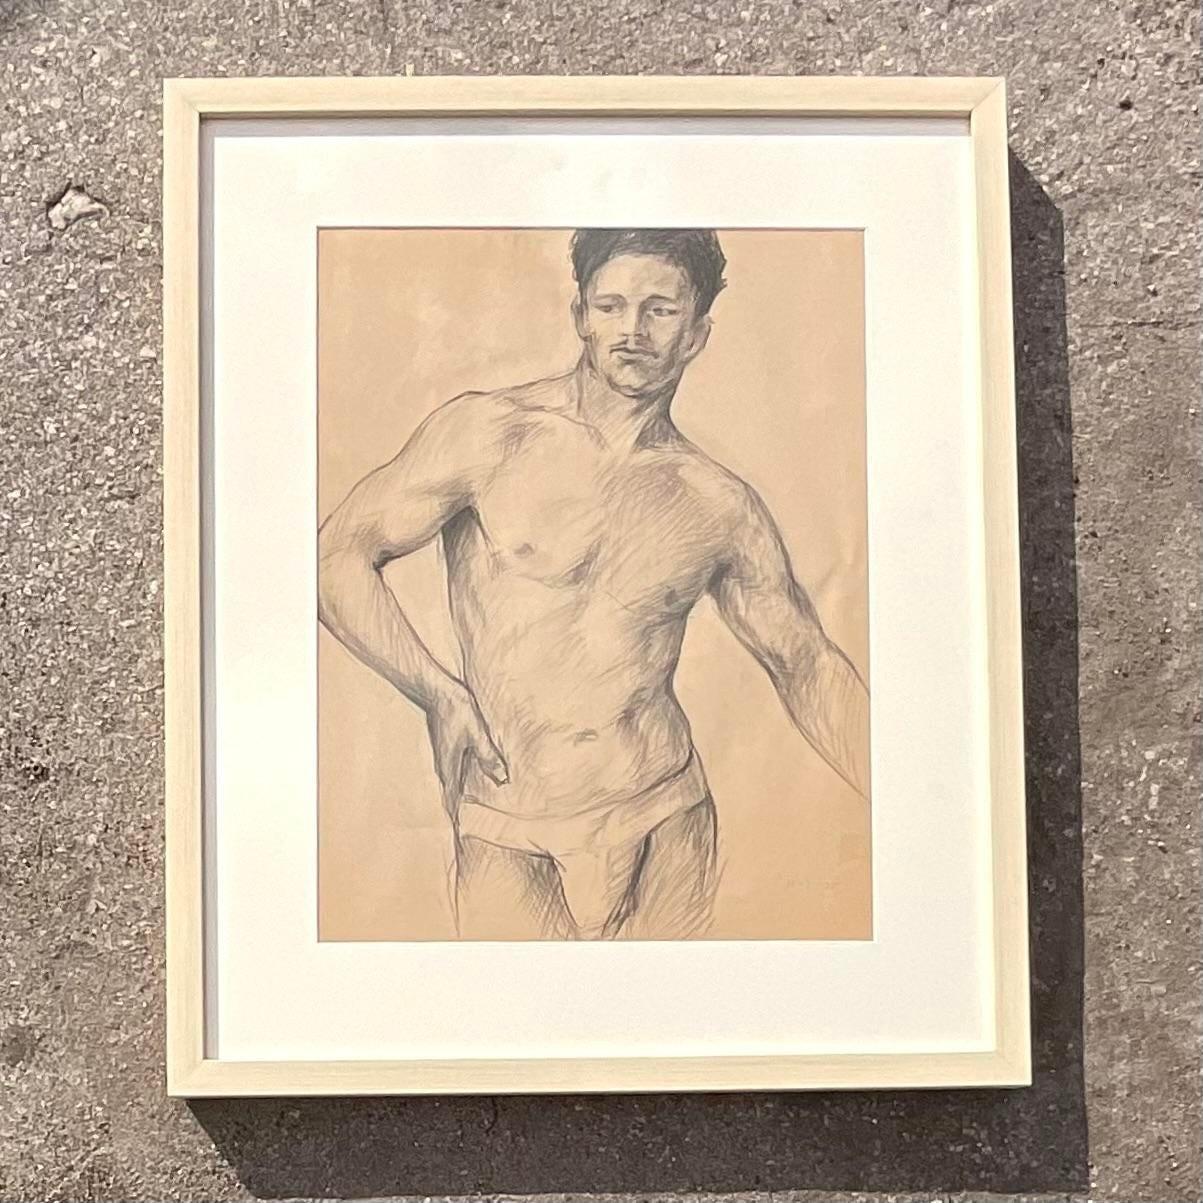 A stunning vintage boho original pencil sketch of man. An amazing 1935 rendering with incredible attention to detail. Acquired from a Palm Beach estate.